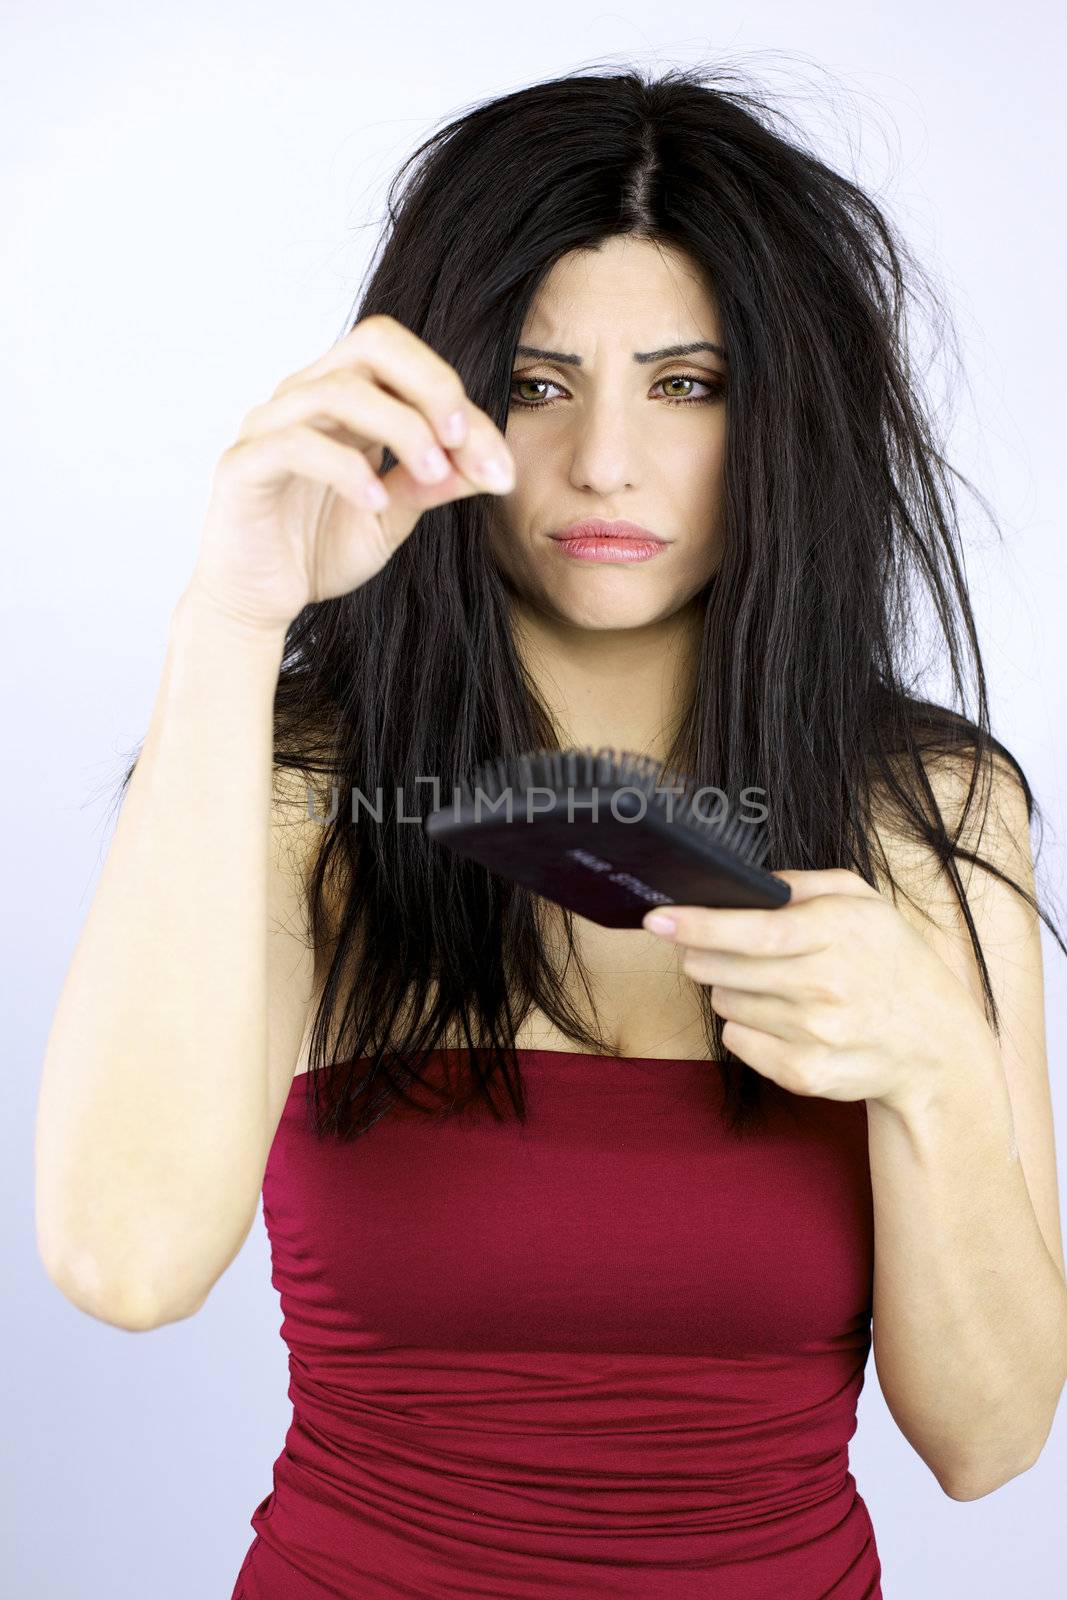 Woman with anorexia and drugs problems loosing much long hair